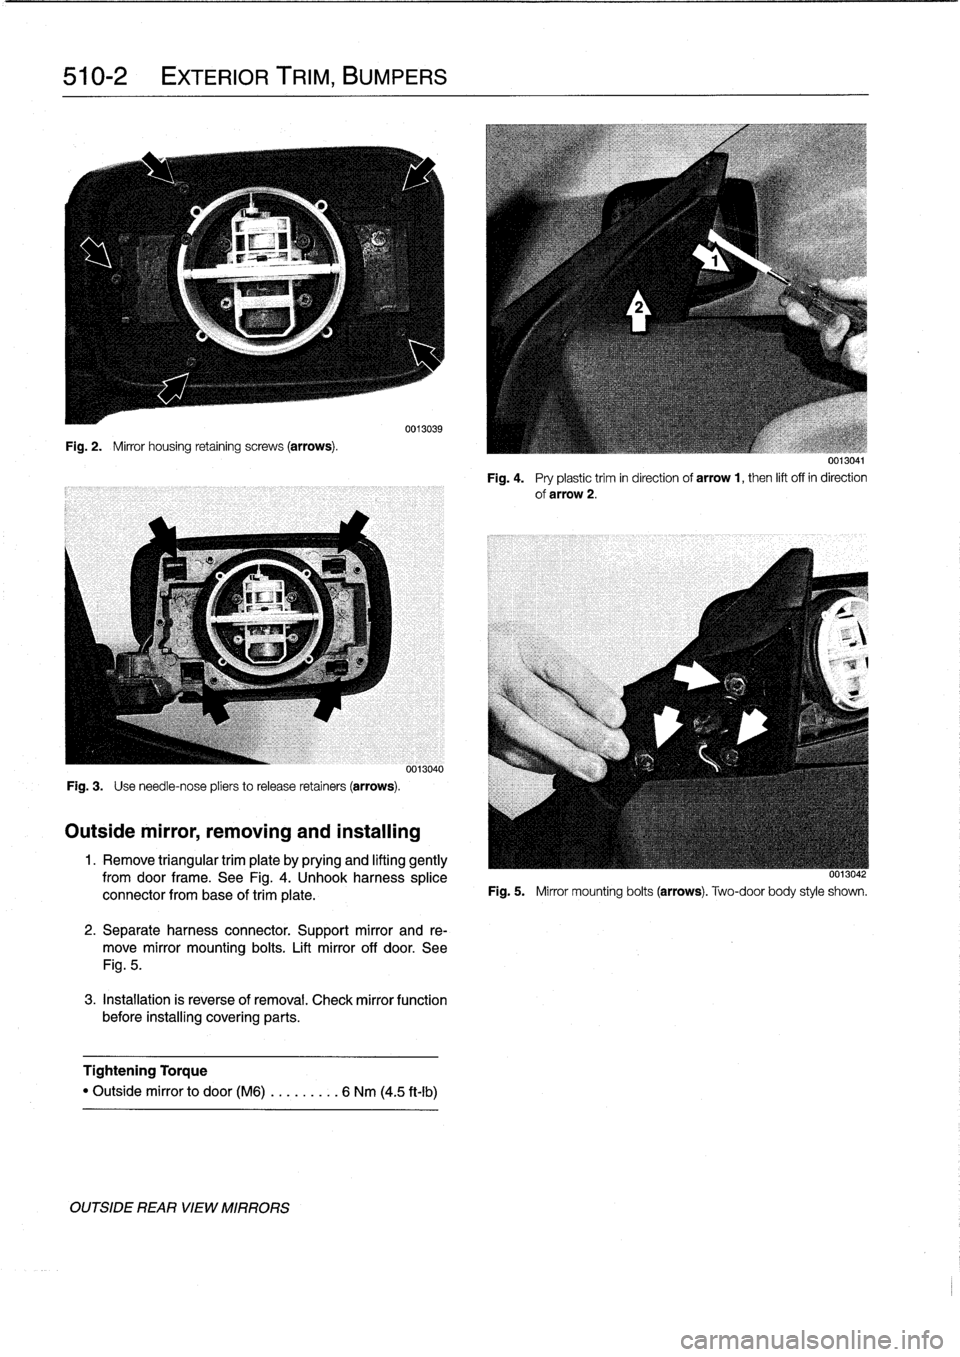 BMW 318i 1997 E36 Workshop Manual 
510-2

	

EXTERIOR
TRIIVI,
BUMPERS

Fig
.
2
.

	

Mirror
housing
retaining
screws
(arrows)
.

Fig
.
3
.

	

Use
need1e-nose
pliers
to
release
retainers
(arrows)
.

Outside
mirror,
removing
and
instal